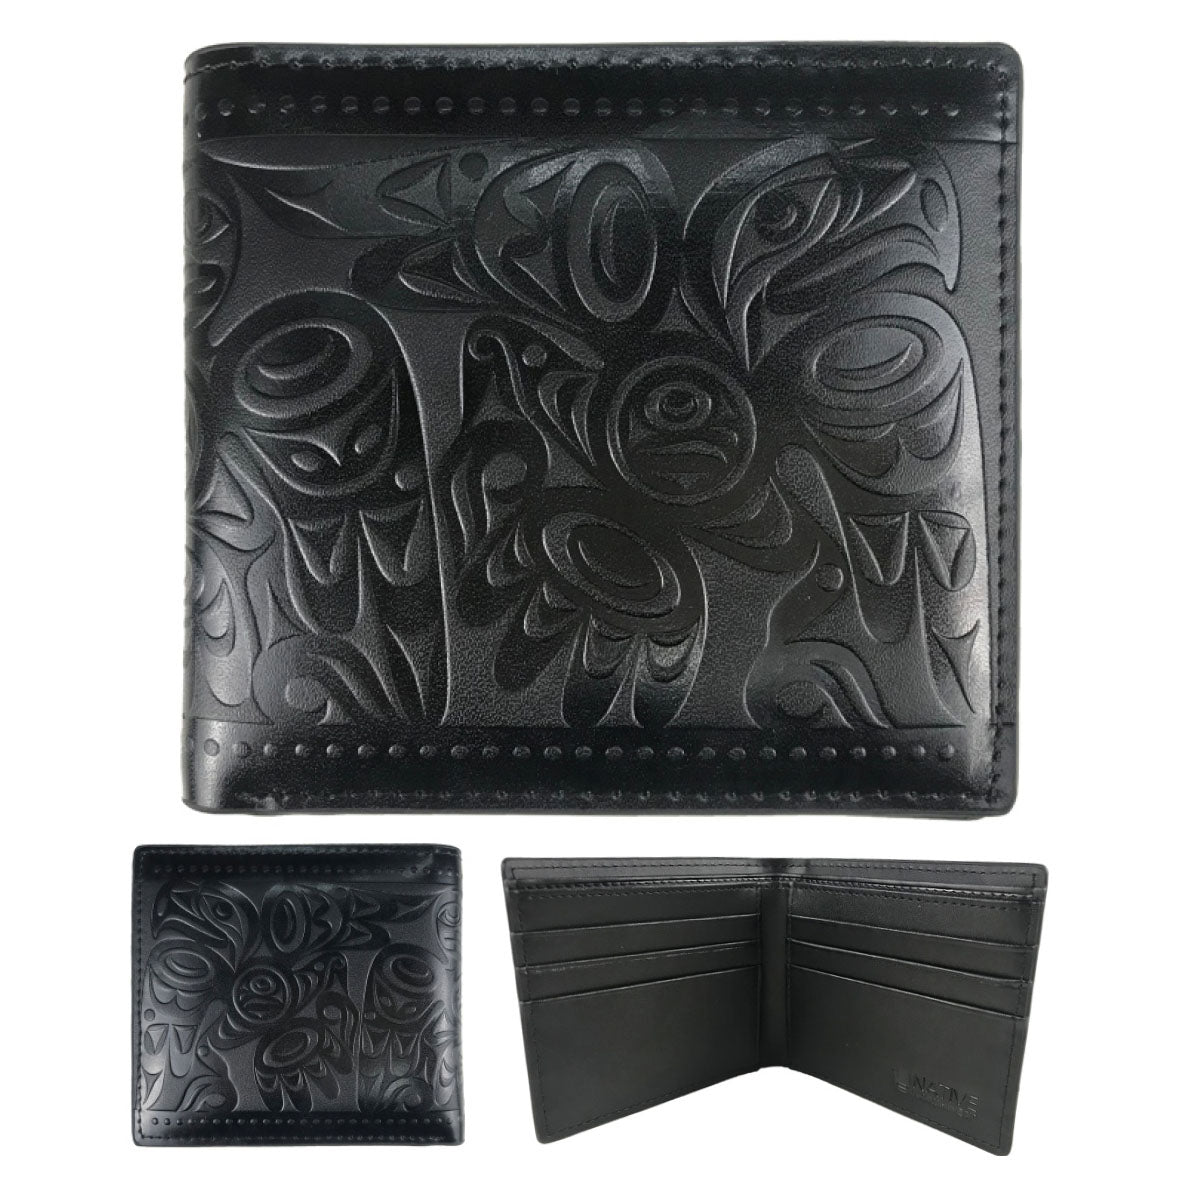 Leather Wallet Salish Eagle - Leather Wallet Salish Eagle -  - House of Himwitsa Native Art Gallery and Gifts